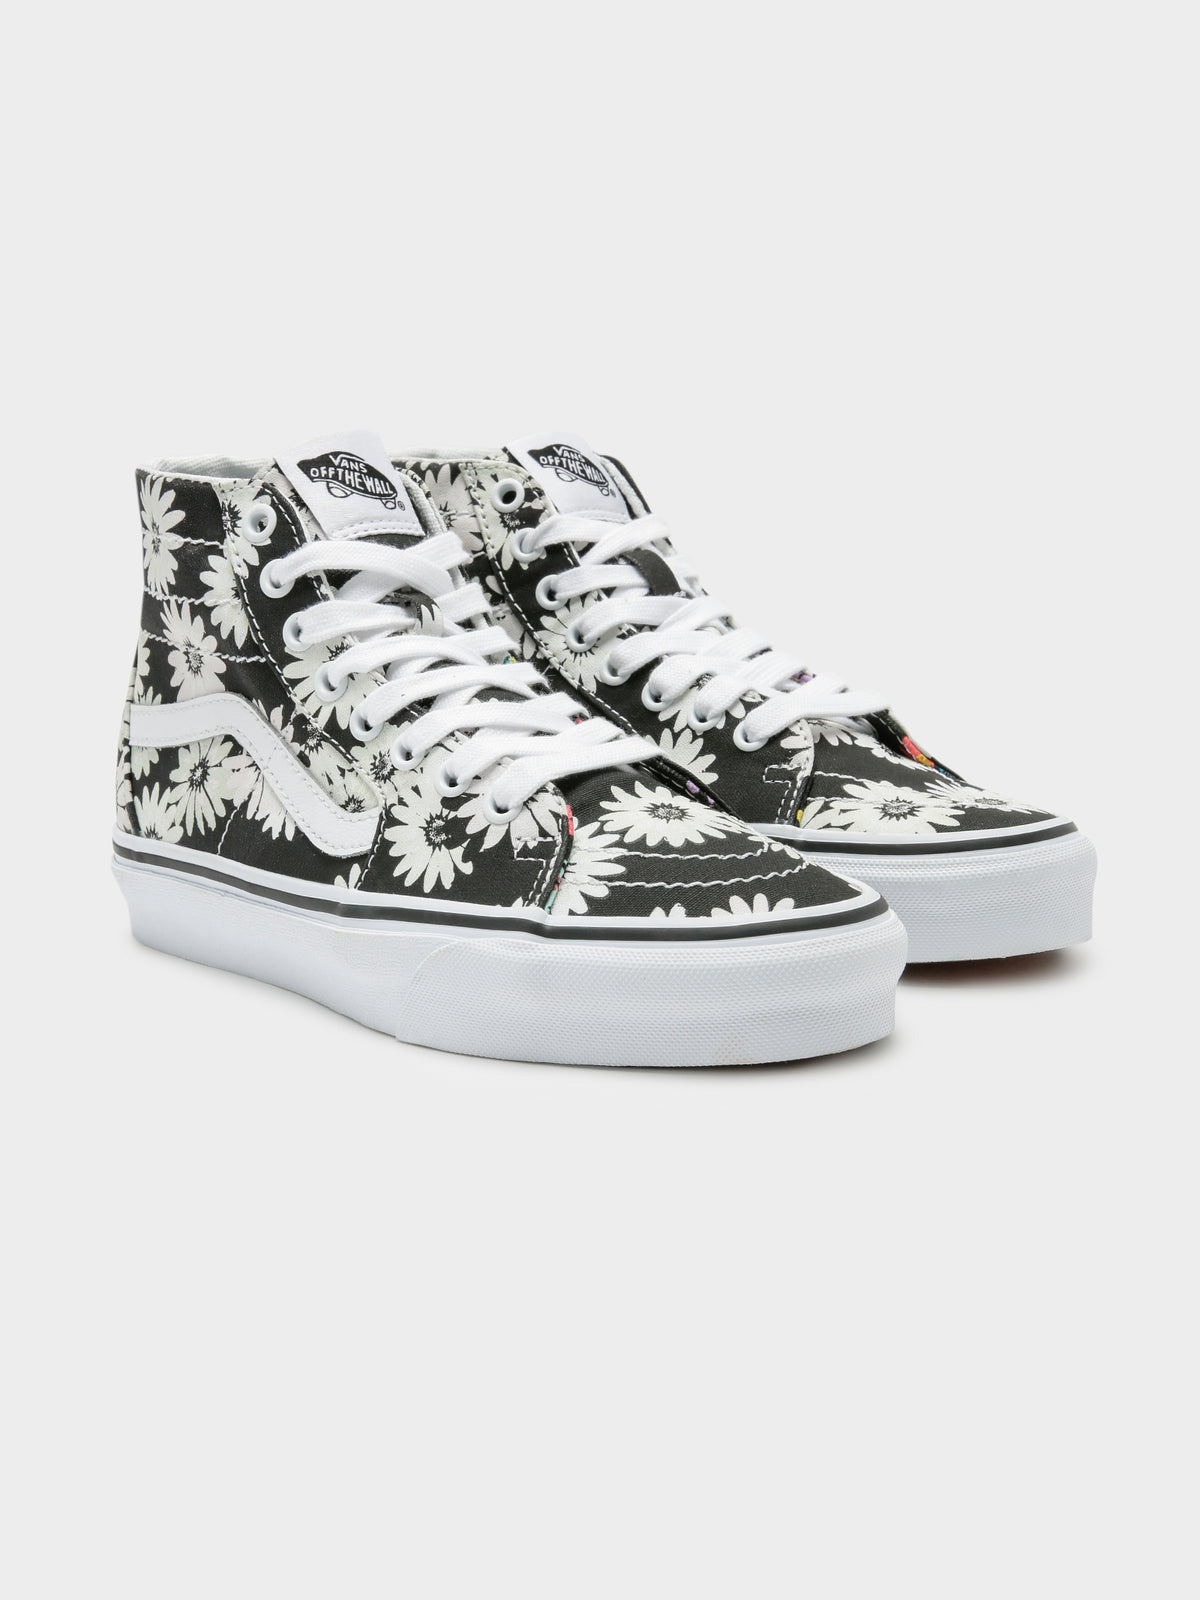 Womens Sk8 High Tapered Sneakers in Peace Floral